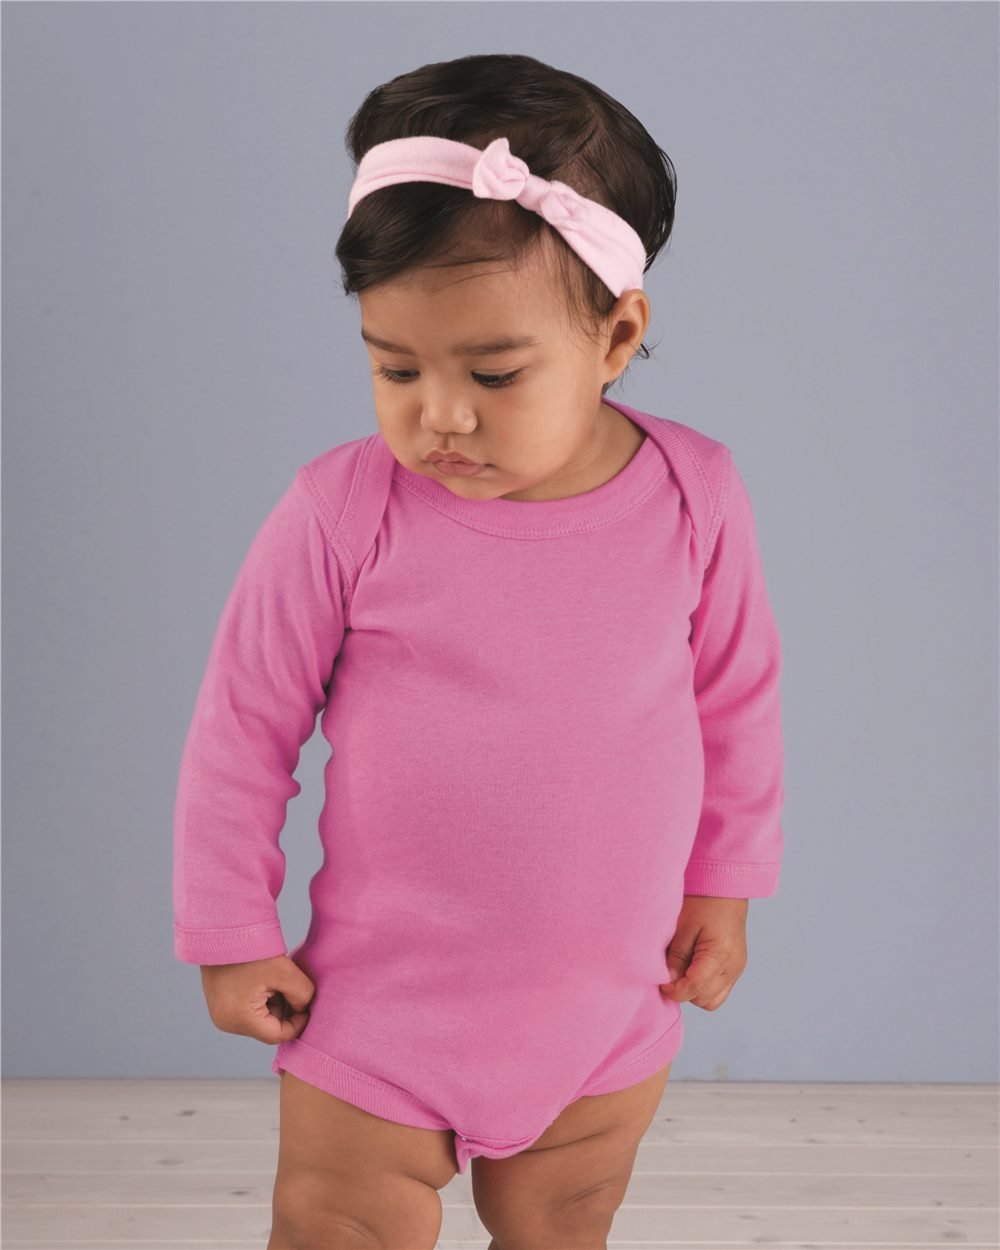 Infant Long Sleeve Baby Ribbed Body Suit - (STYLE#STLT004411)